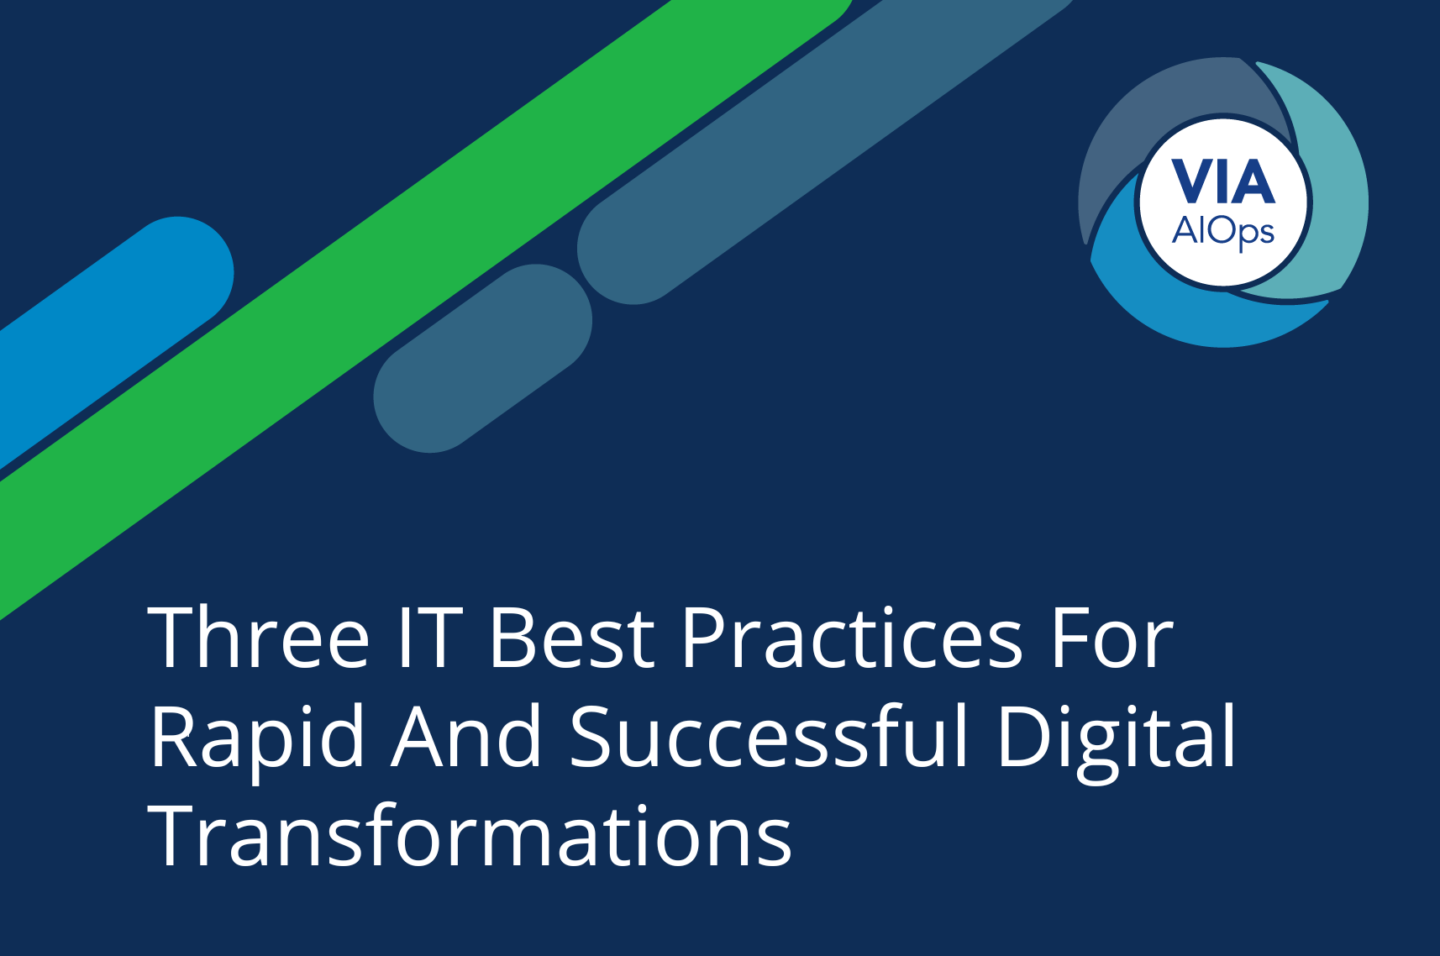 Three IT Best Practices For Rapid And Successful Digital Transformations